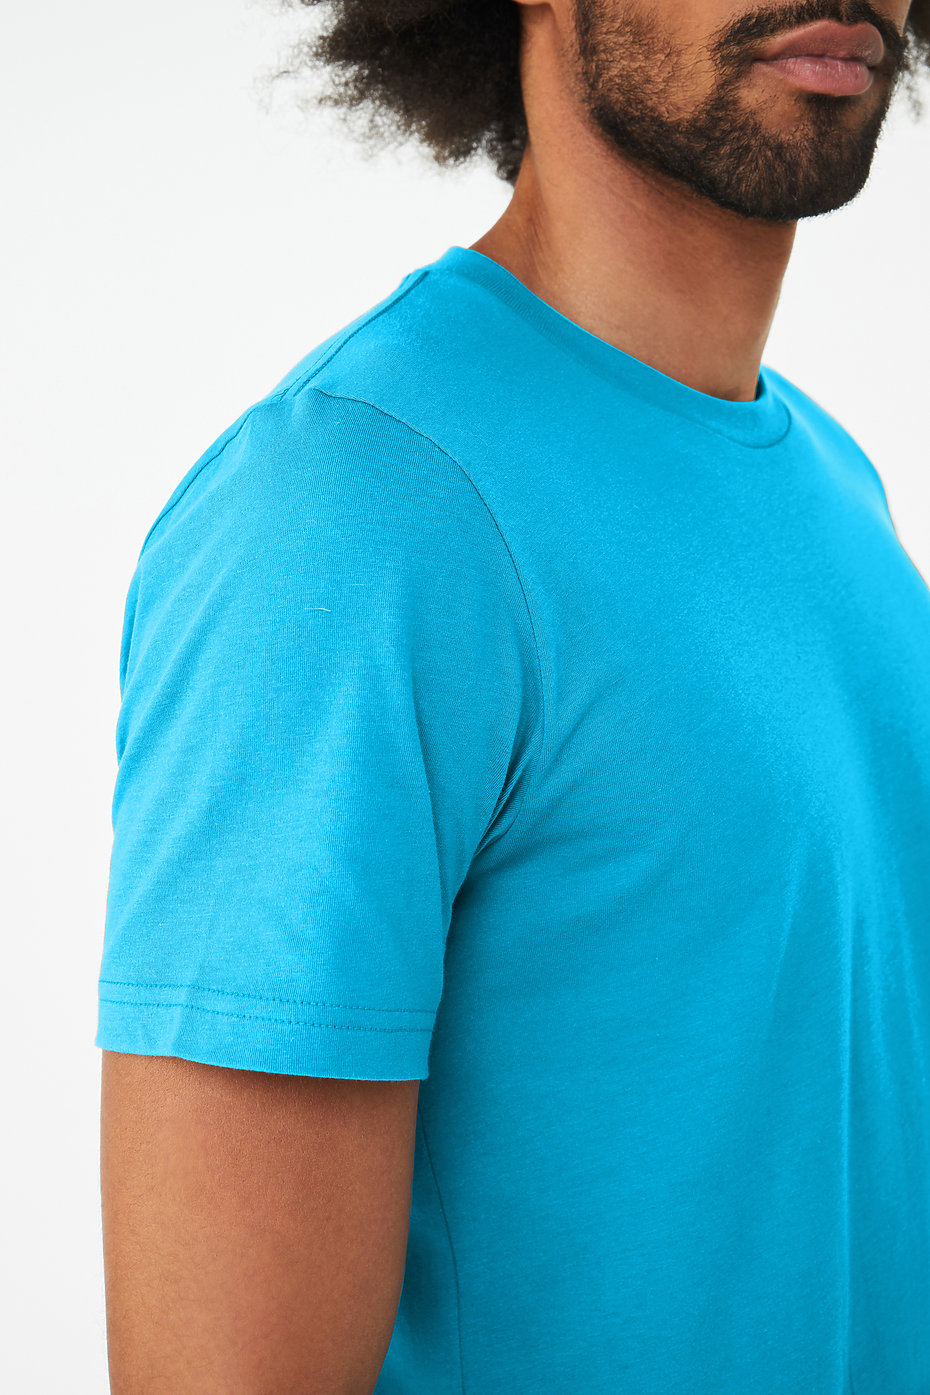 5-pack Slim Fit T-shirts - Blue/Turquoise/Red - Men